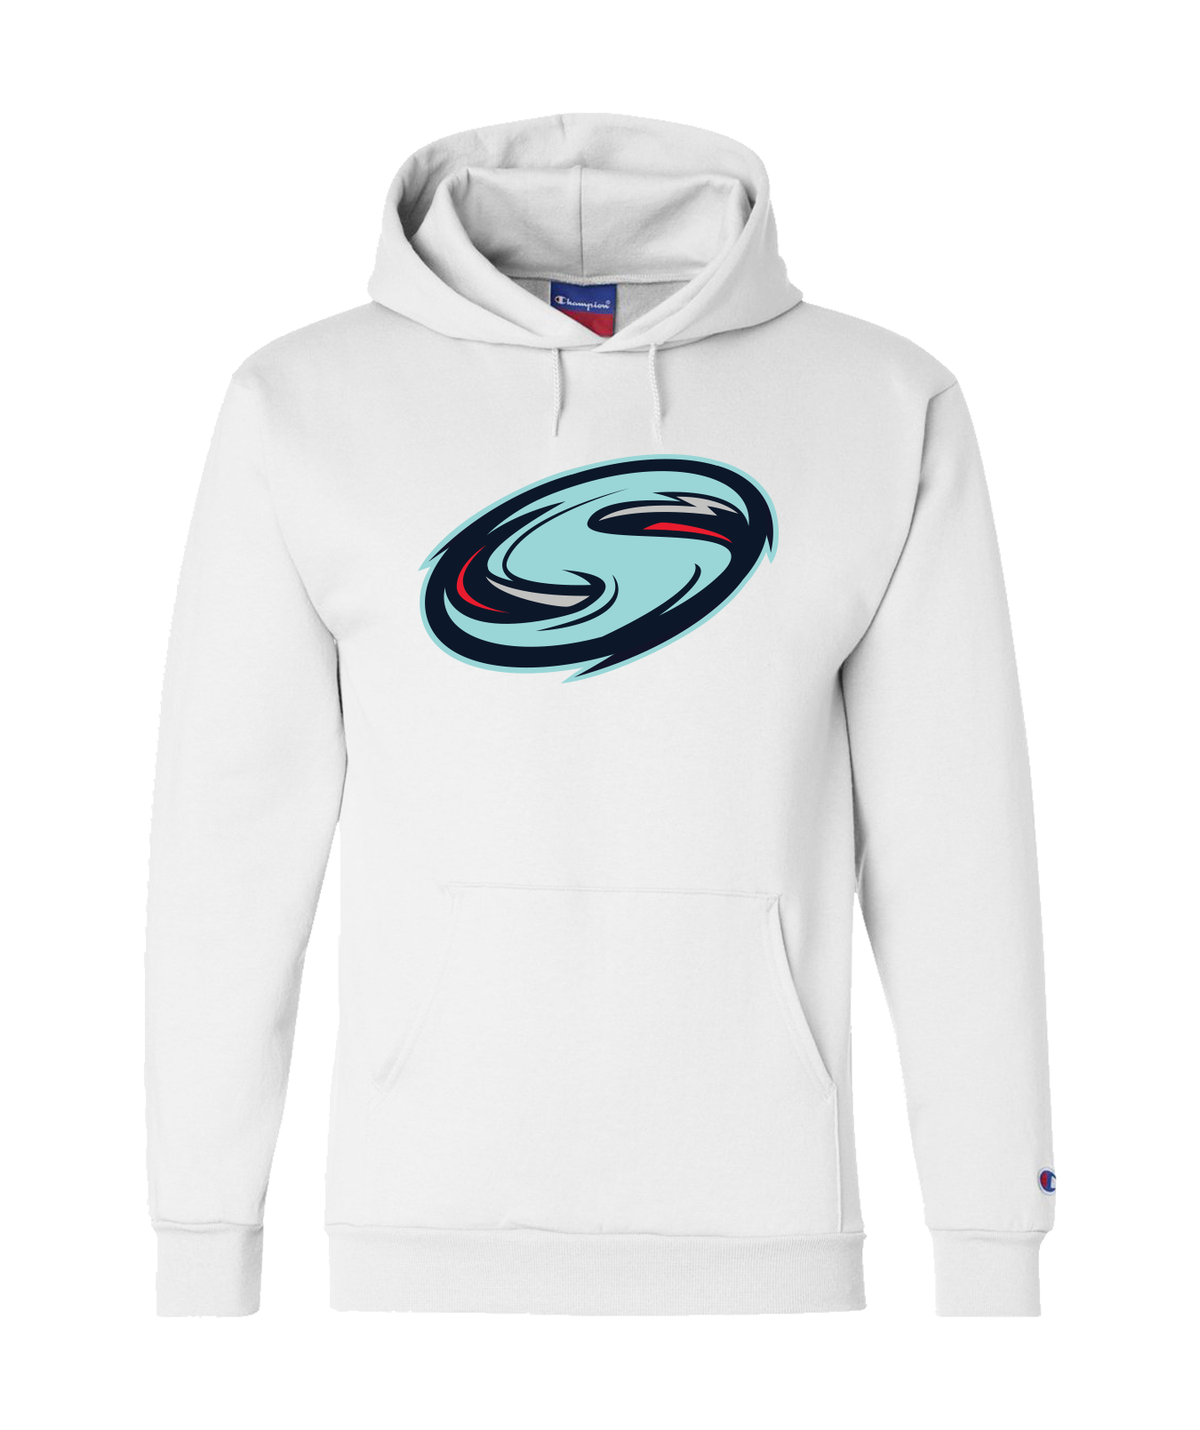 Storm Champion Whiteout Hoodie